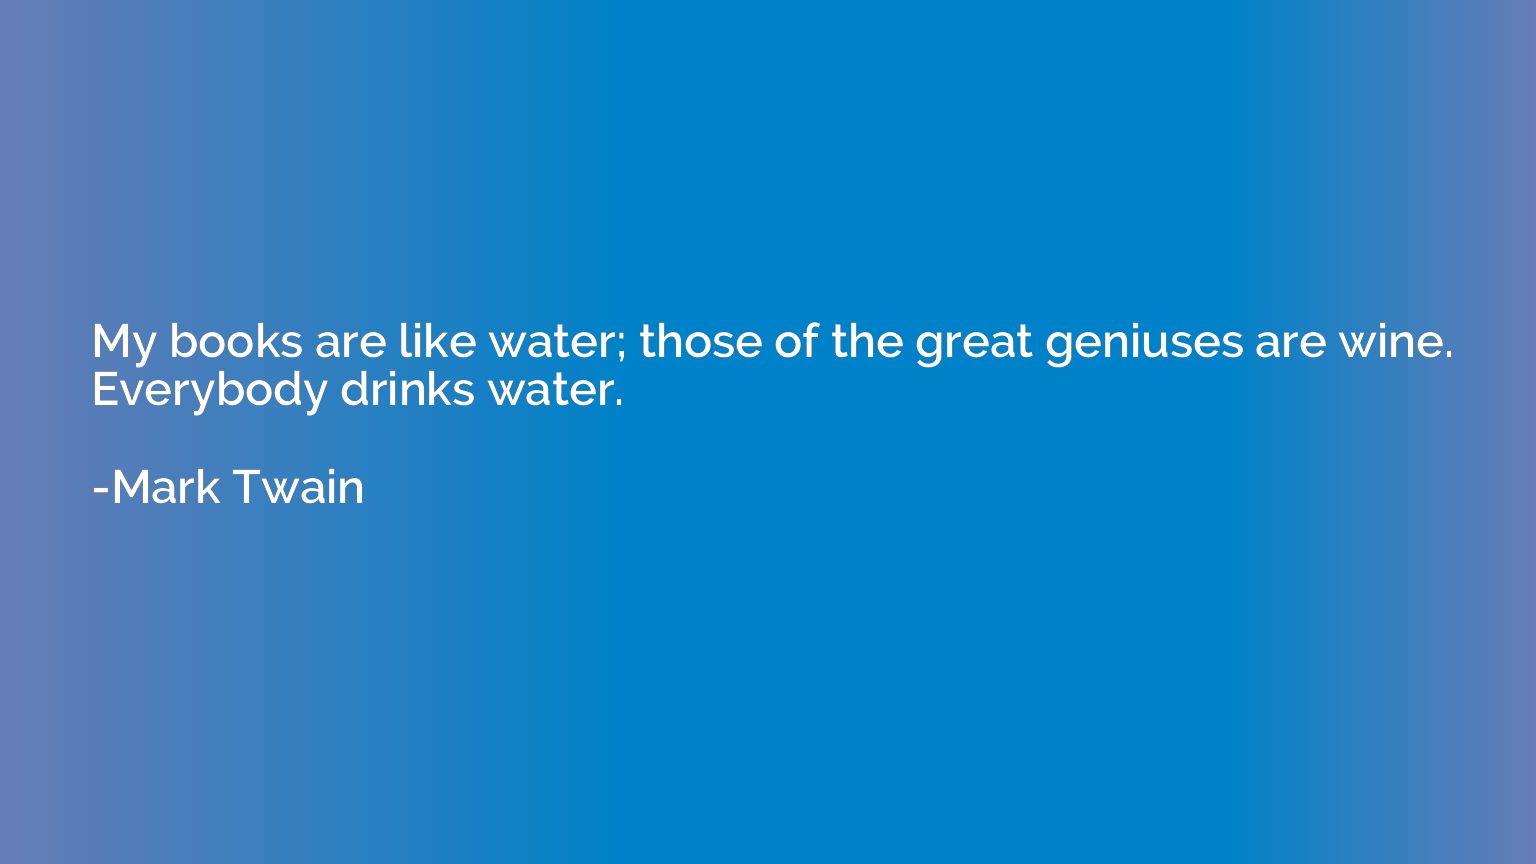 My books are like water; those of the great geniuses are win